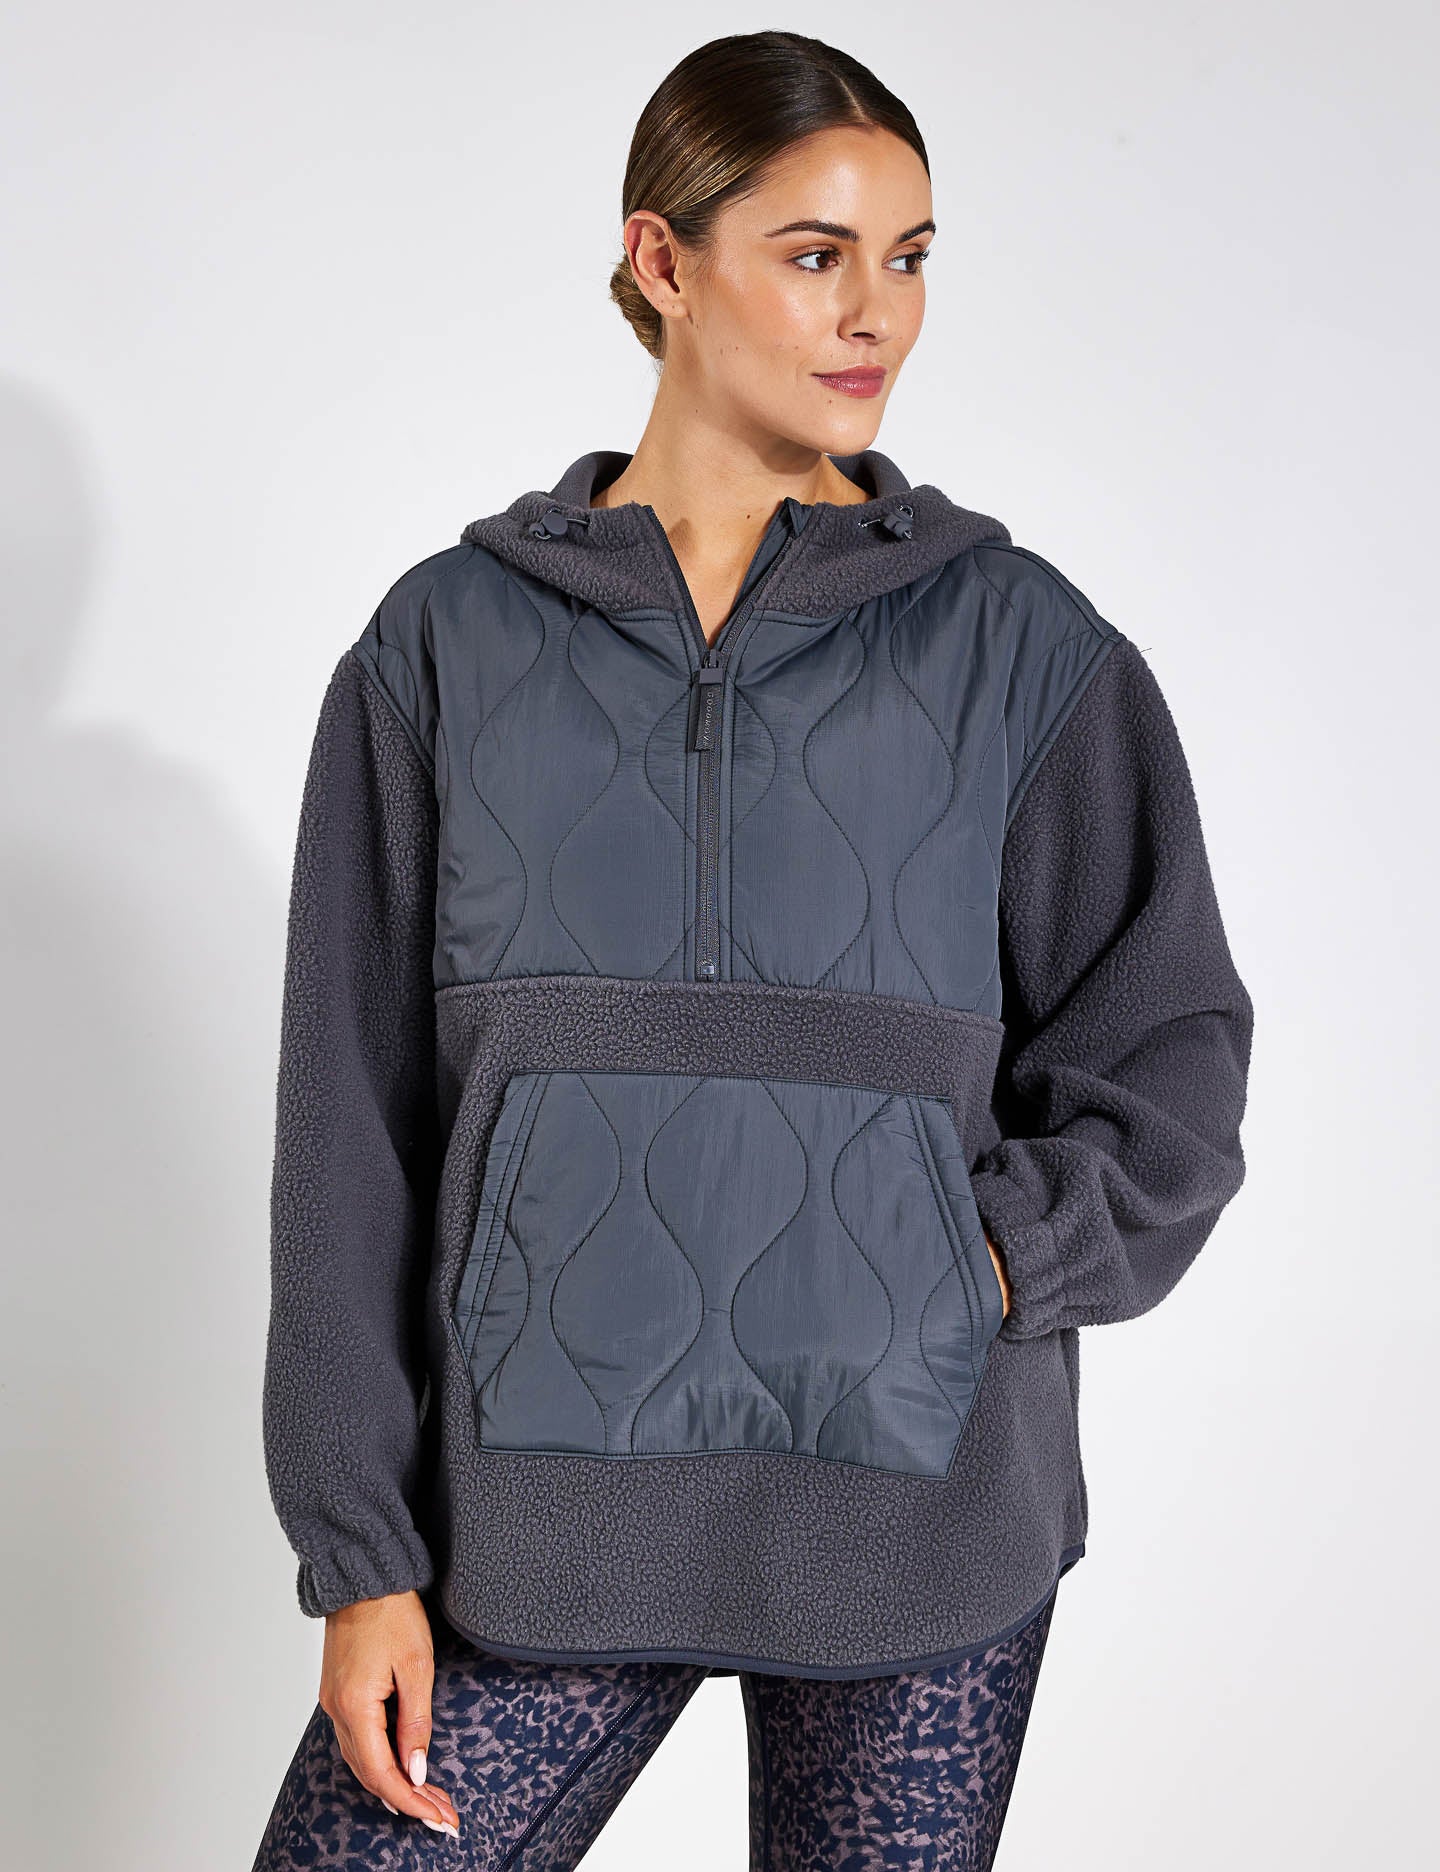 Goodmove | Mixed Borg Quilt Hoodie - Dark Grey | The Sports Edit